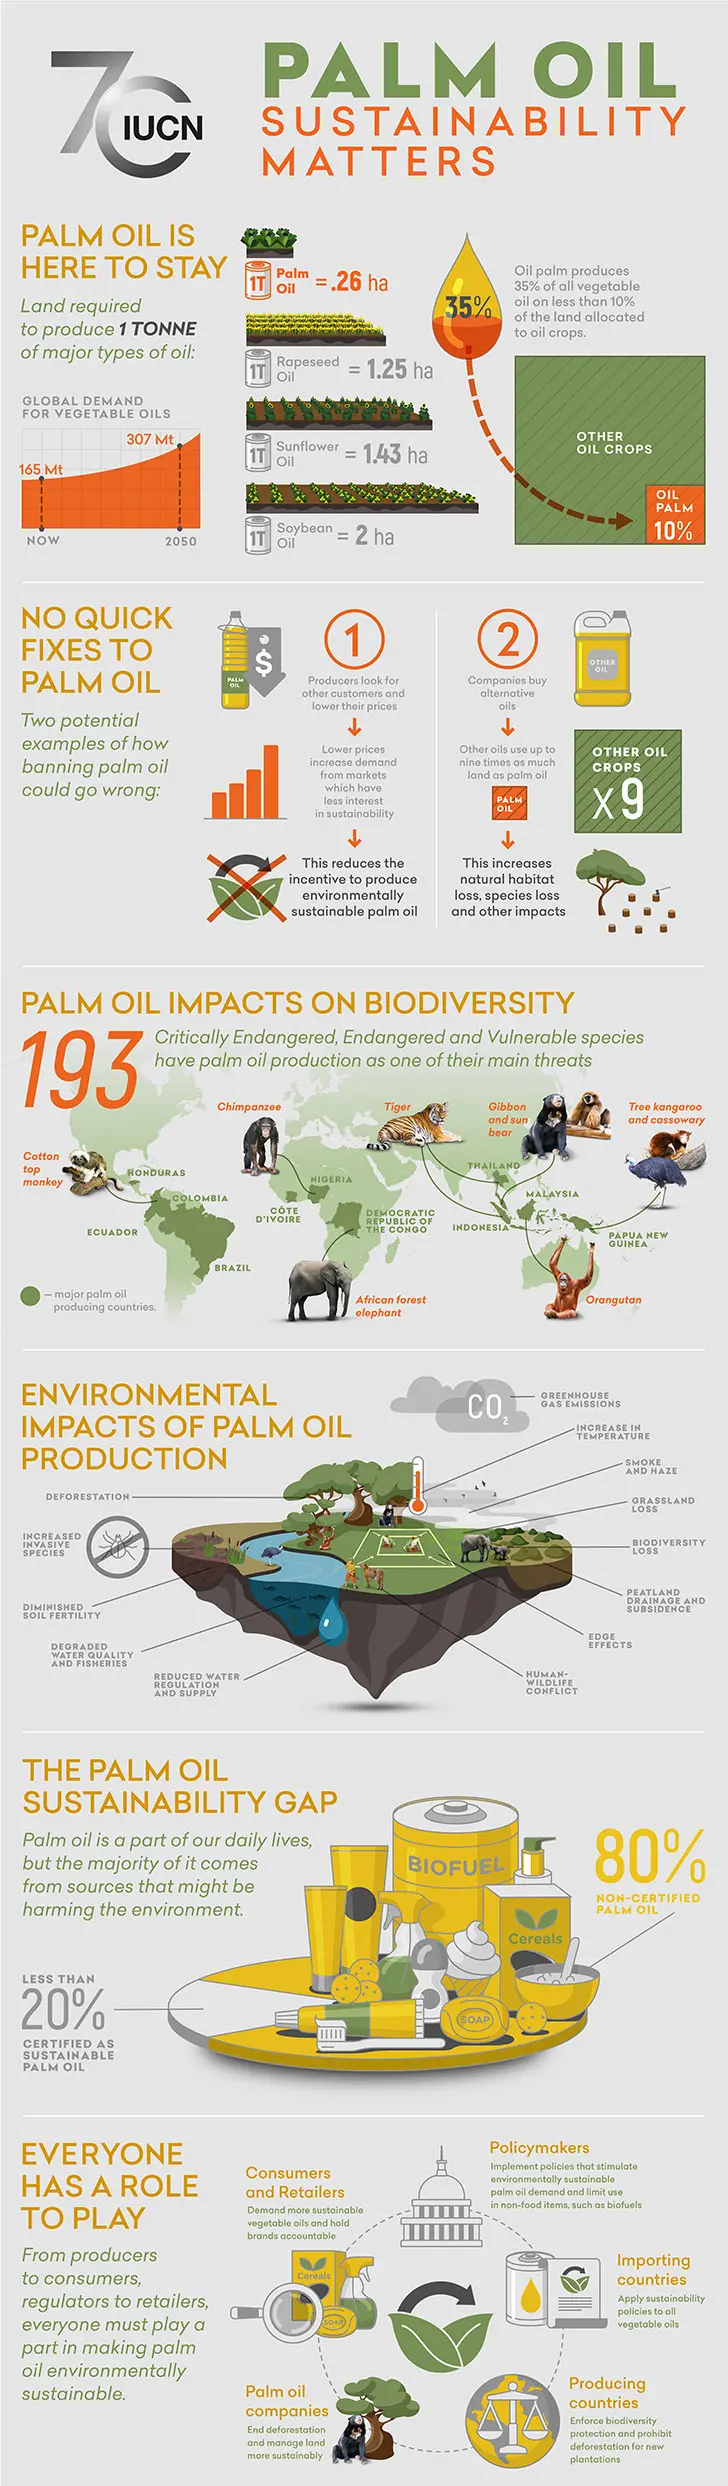 Oil palm and biodiversity infographic